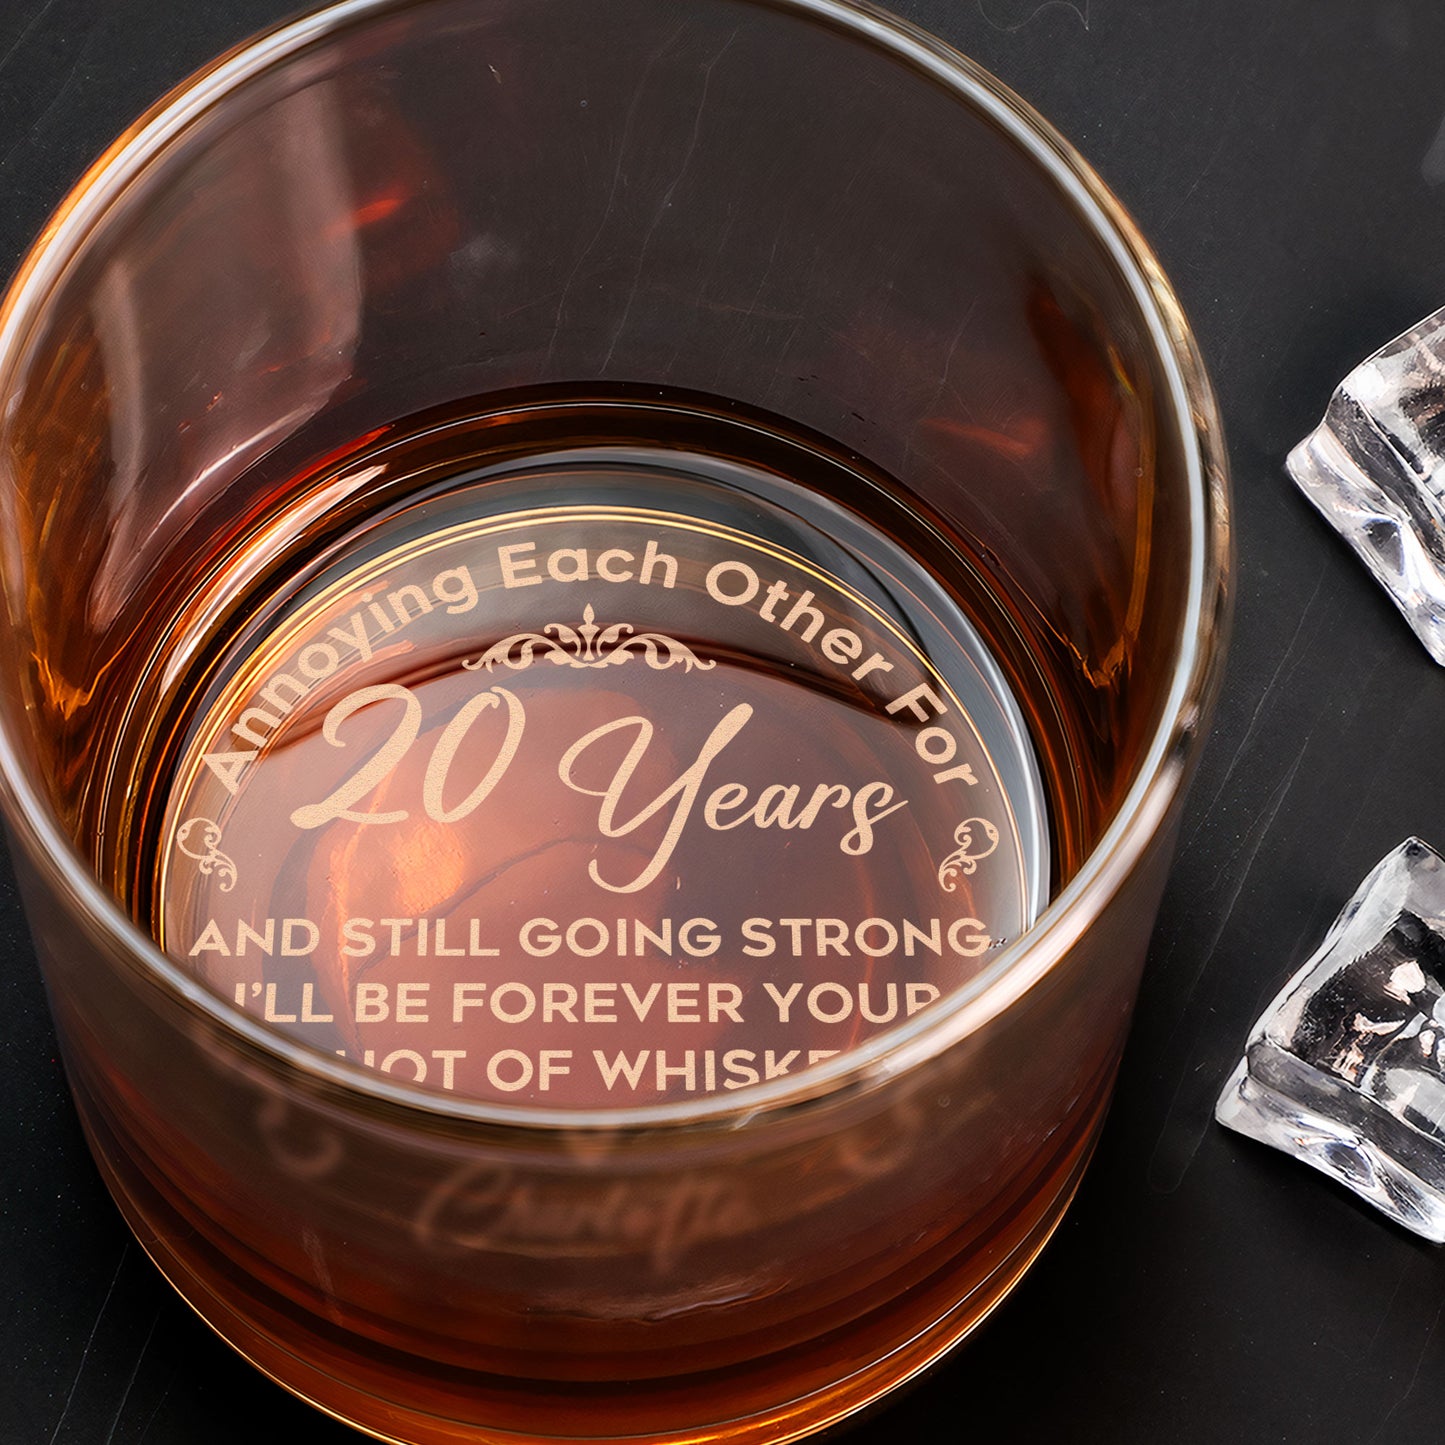 Annoying Each Other For Years & Still Going Strong - Personalized Engraved Whiskey Glass